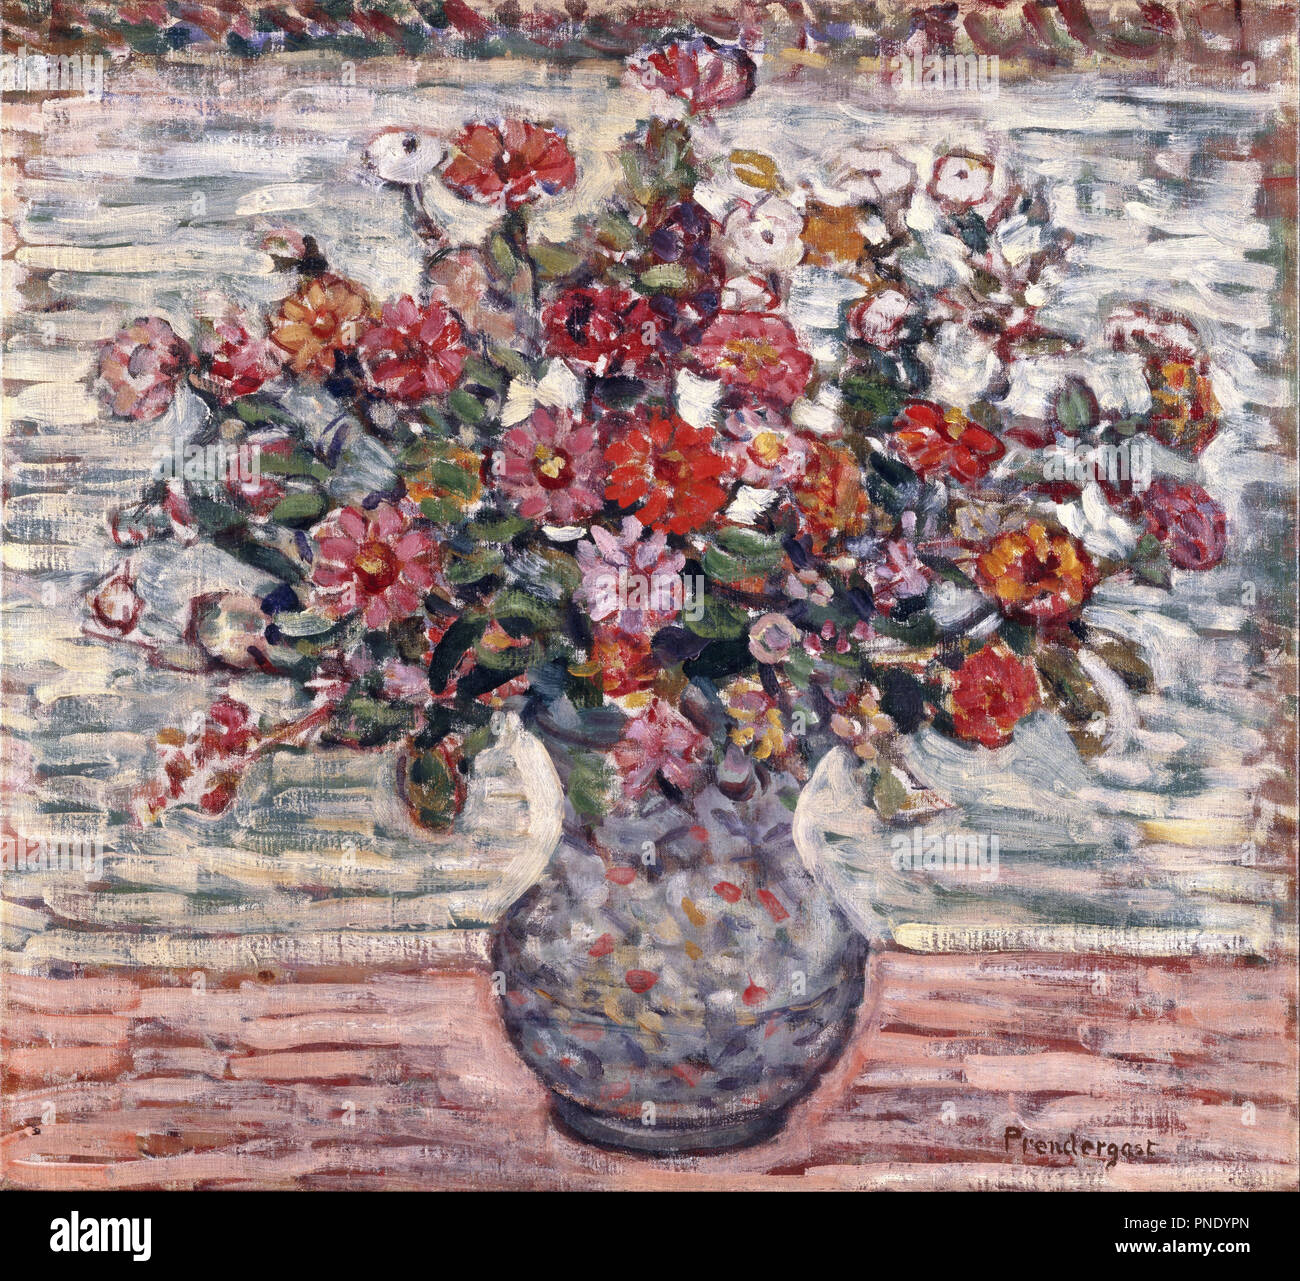 Flowers in a Vase (Zinnias). Date/Period: Ca. 1910-1913. Painting. Oil on canvas. Author: Maurice Prendergast. Stock Photo